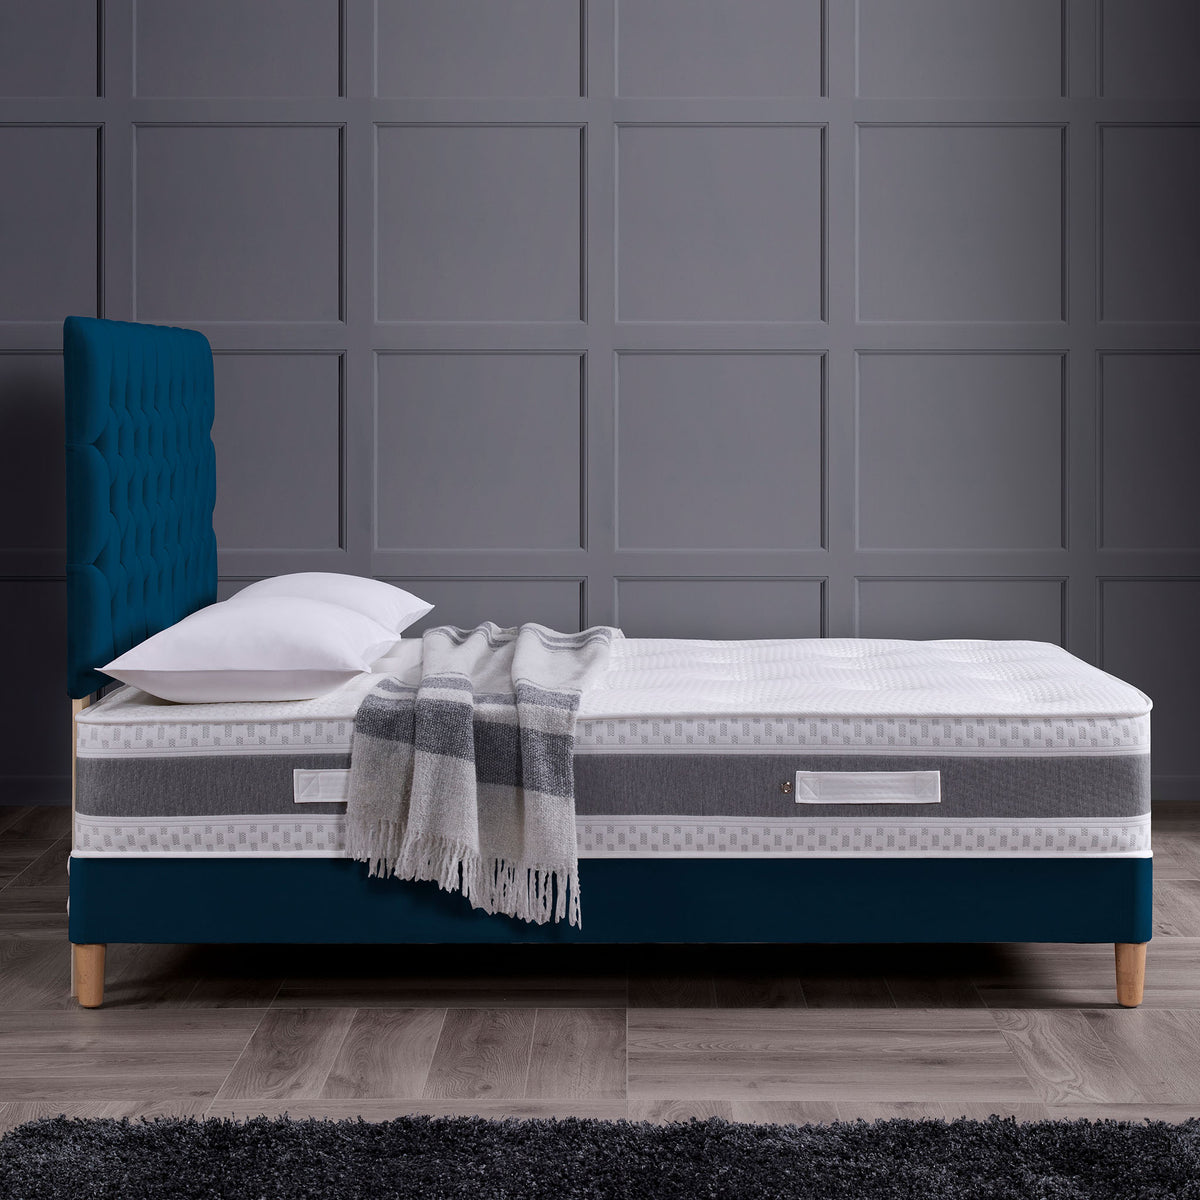 side lifestyle view of the Roseland Sleep Tempest Memory Coil Mattress